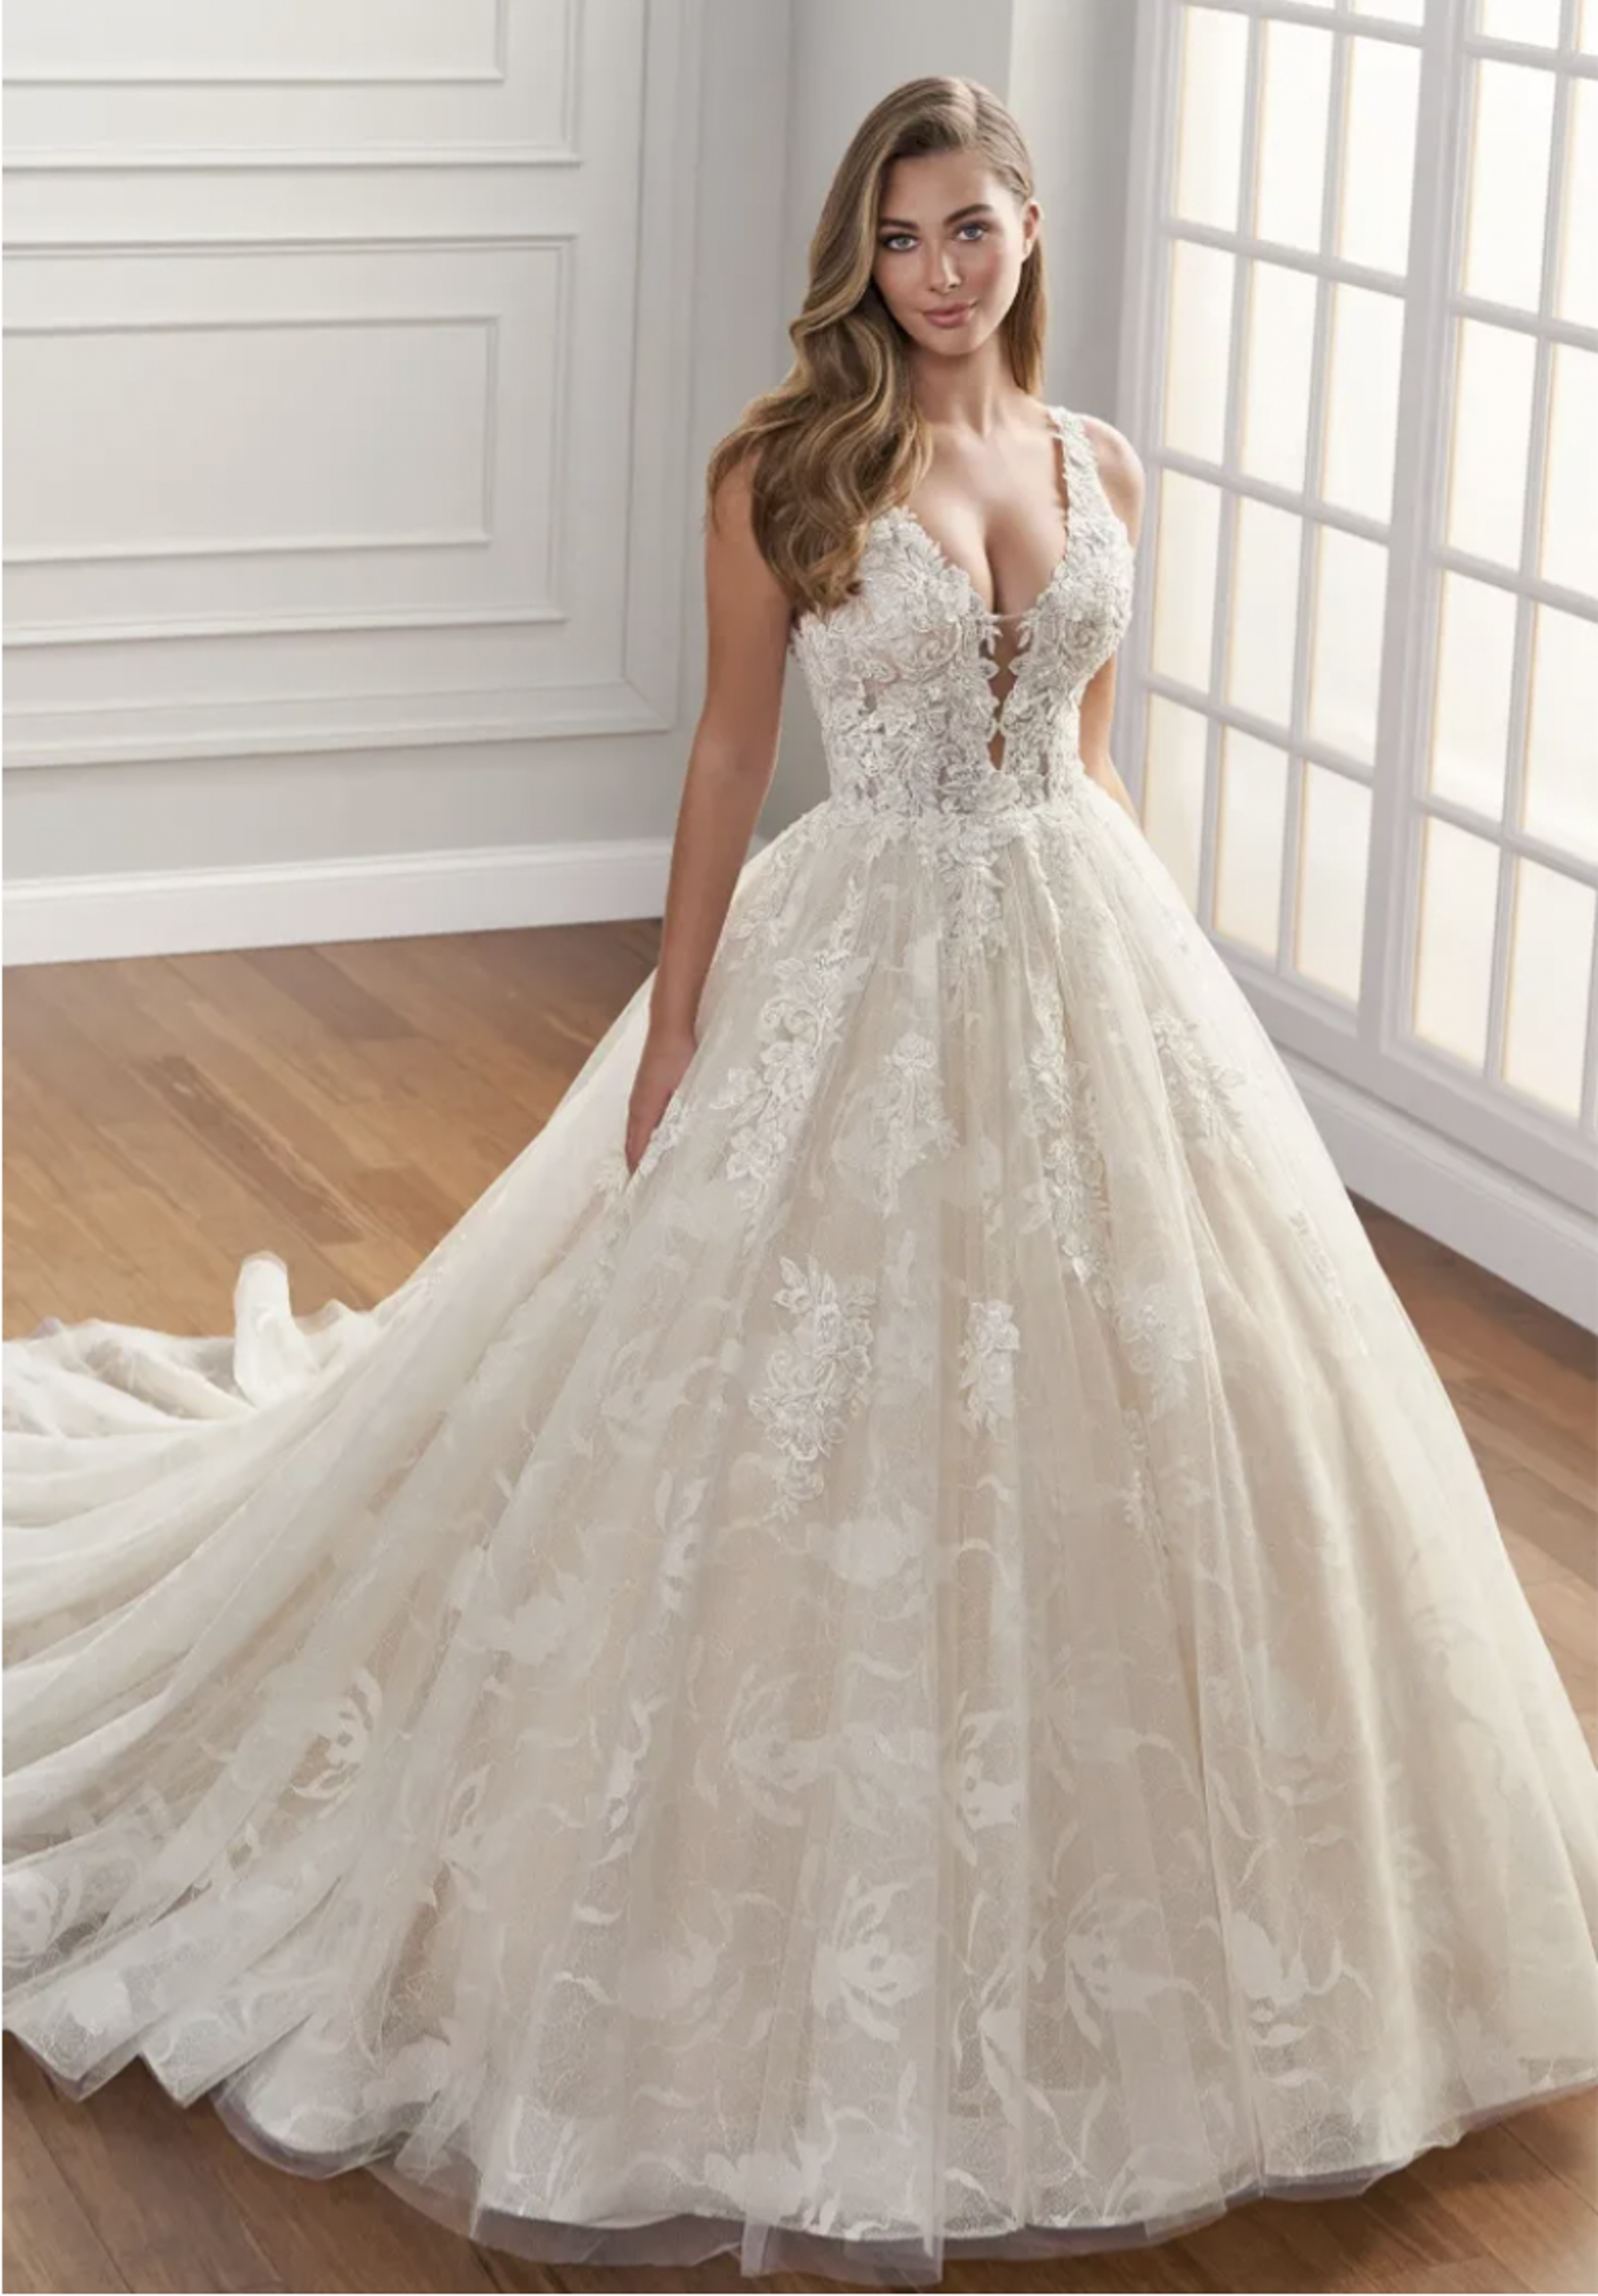 Blonde woman in ball style wedding gown with deep neckline